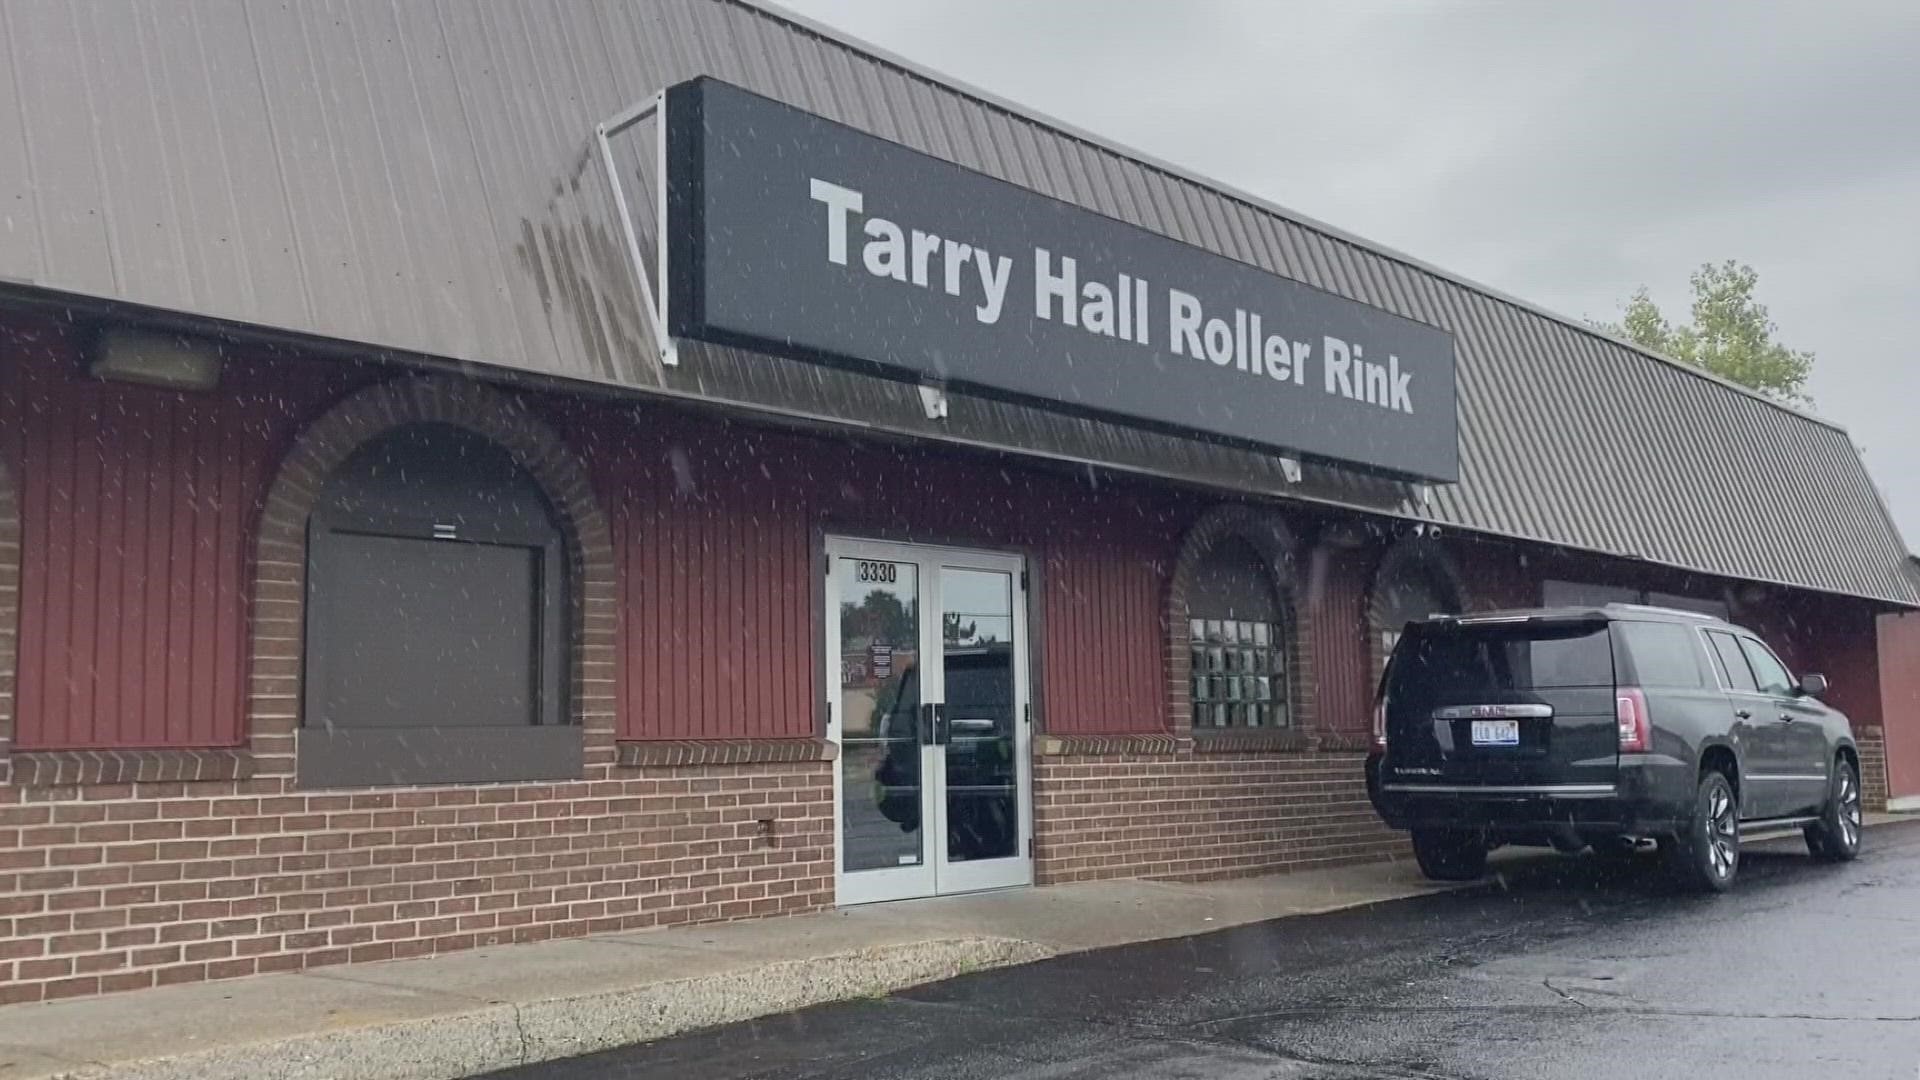 The Tarry Hall Roller Skating Rink hosted their High School Homecoming Dance on Saturday. They're now facing backlash after only inviting 11 certain schools.